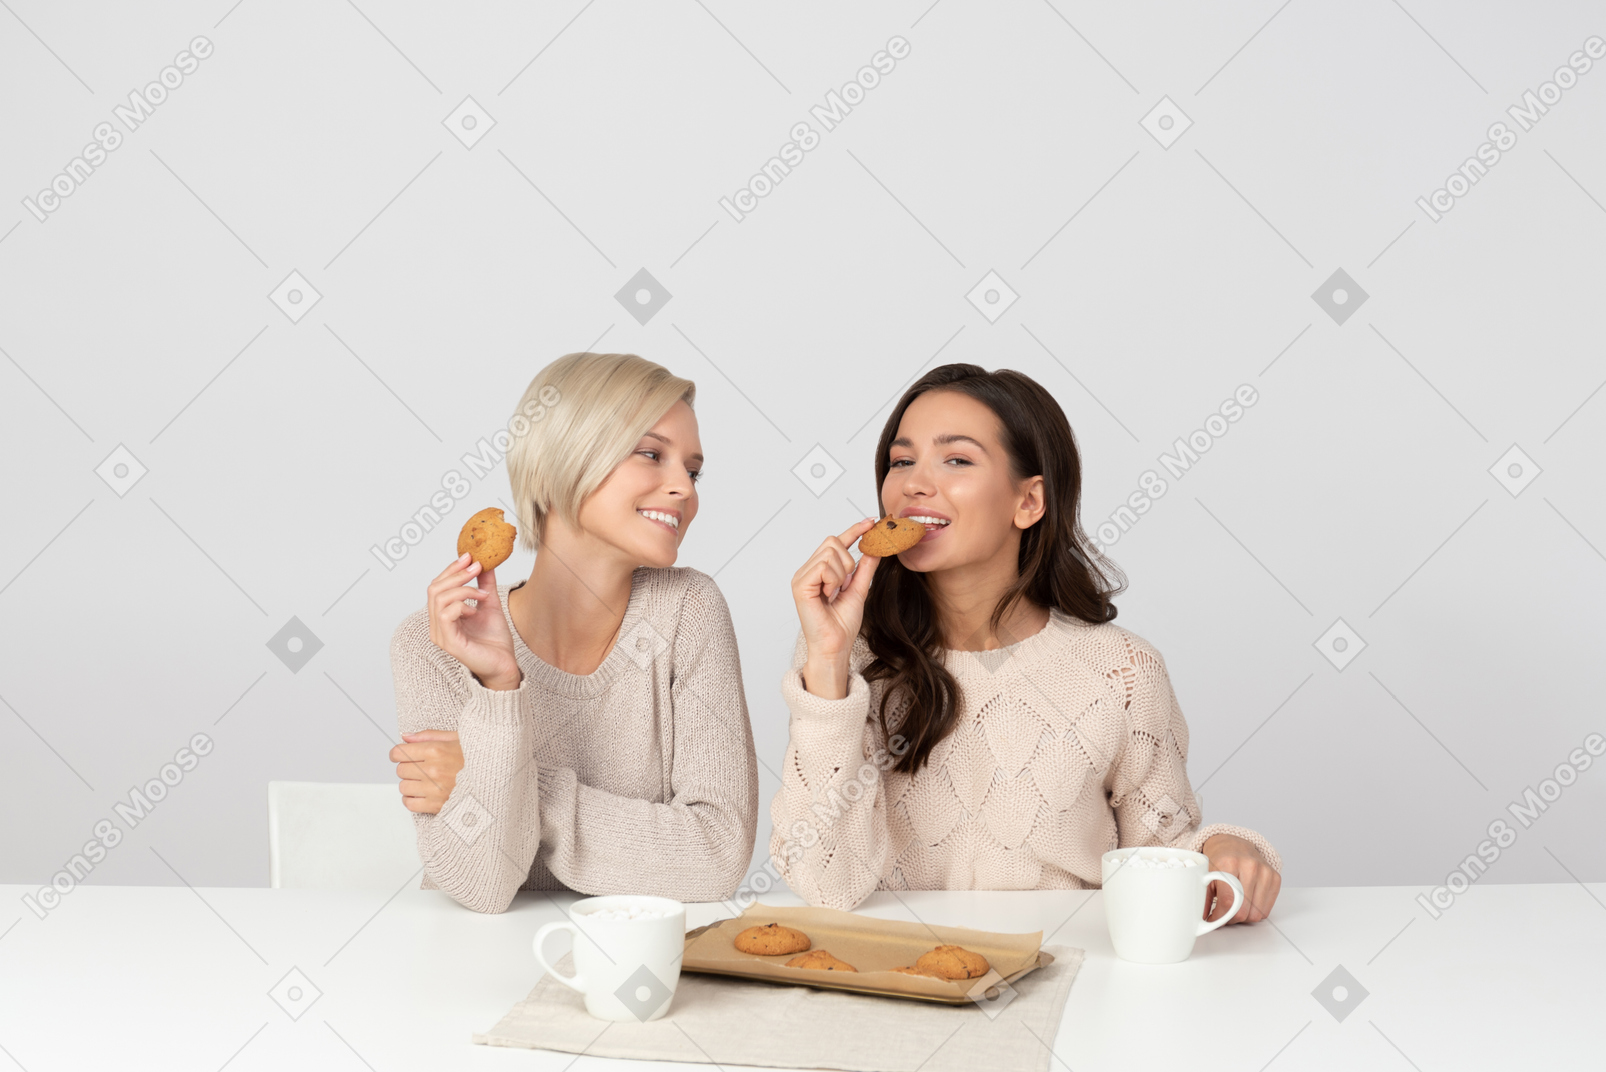 Young women eating cookies and smiling